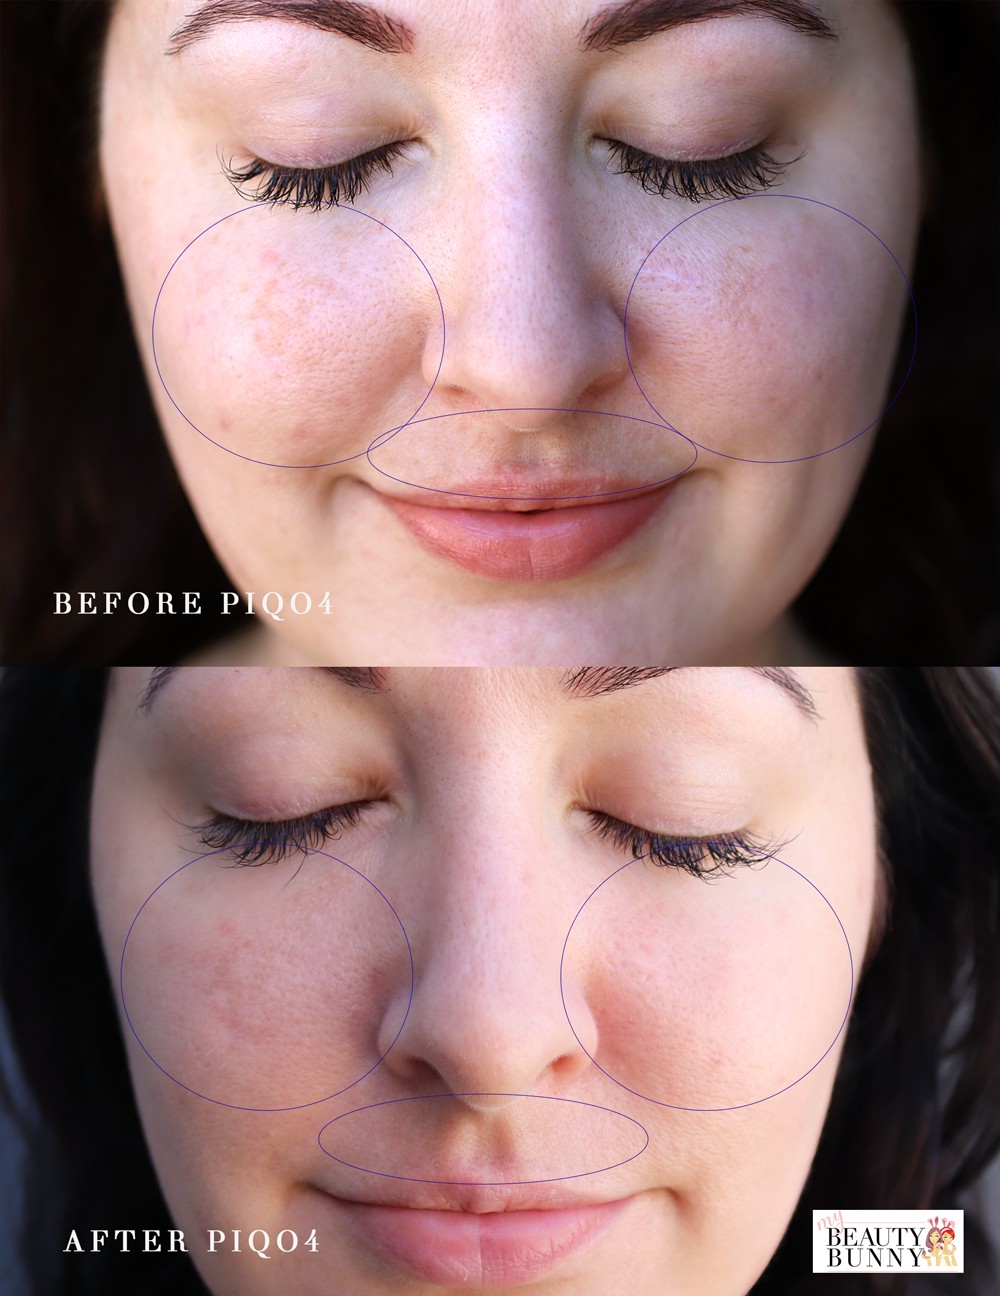 PiQo4 Laser - the Only Melasma Treatment that has Ever Worked for Me! featured by popular Los Angeles cruely free beauty blogger My Beauty Bunny 